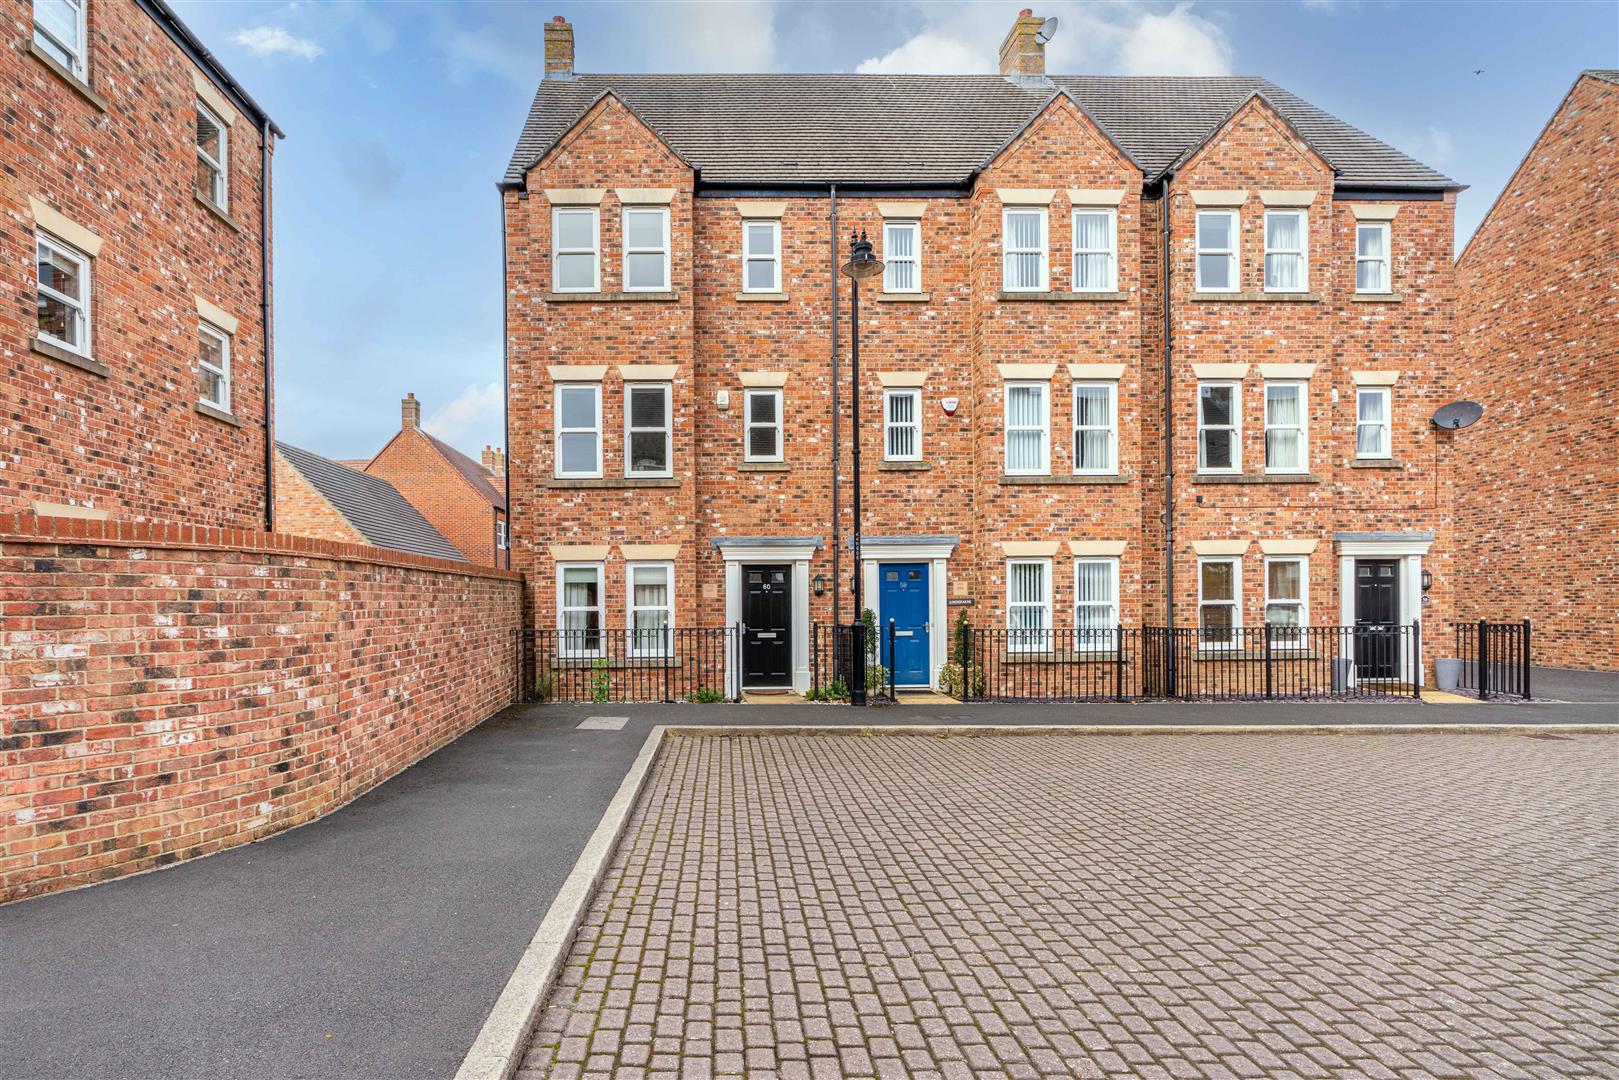 3 bed town house for sale in Warkworth Woods, Newcastle Upon Tyne - Property Image 1